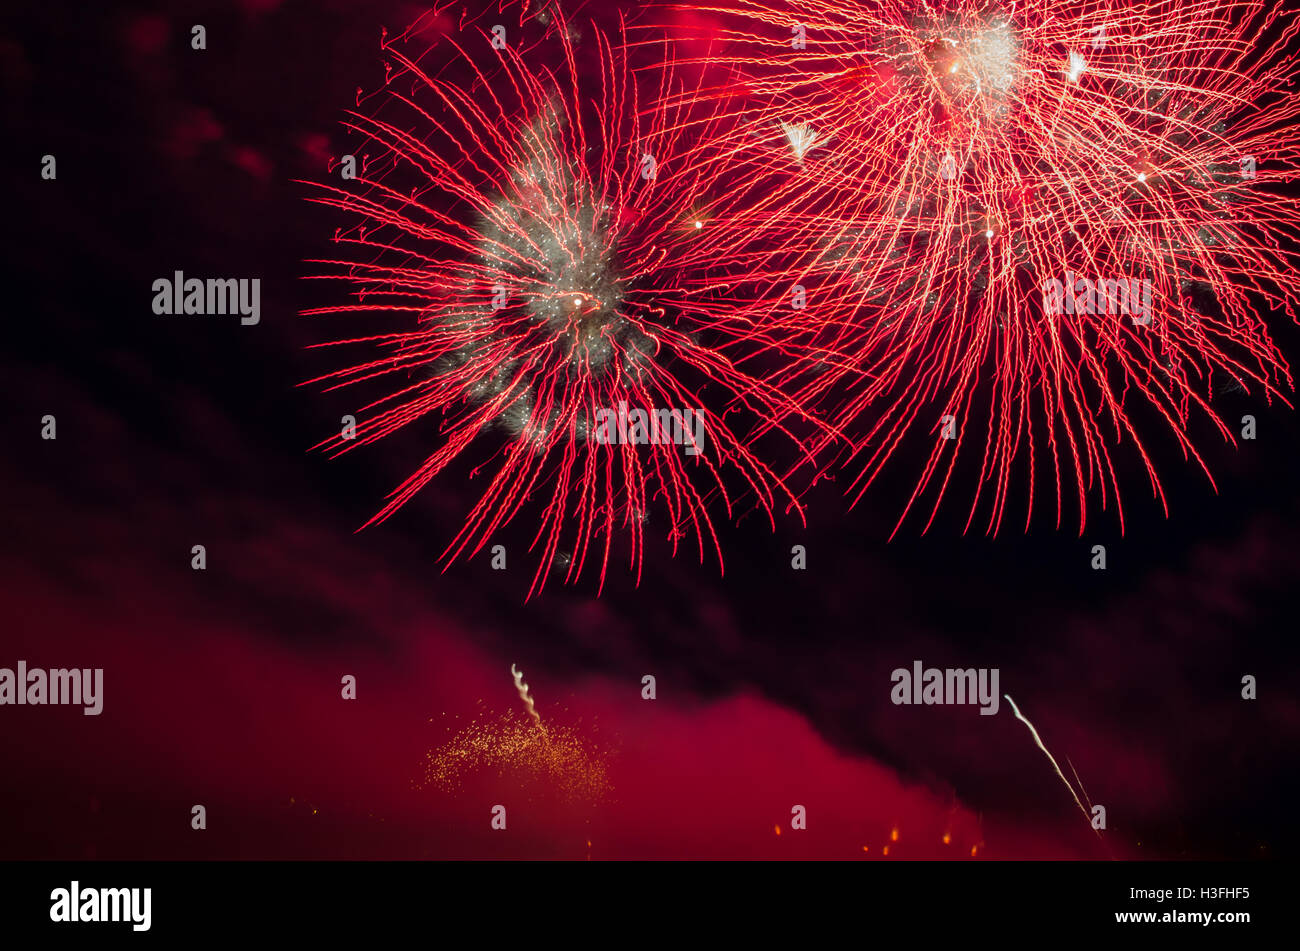 Red bursts and smoke from fireworks at night Stock Photo